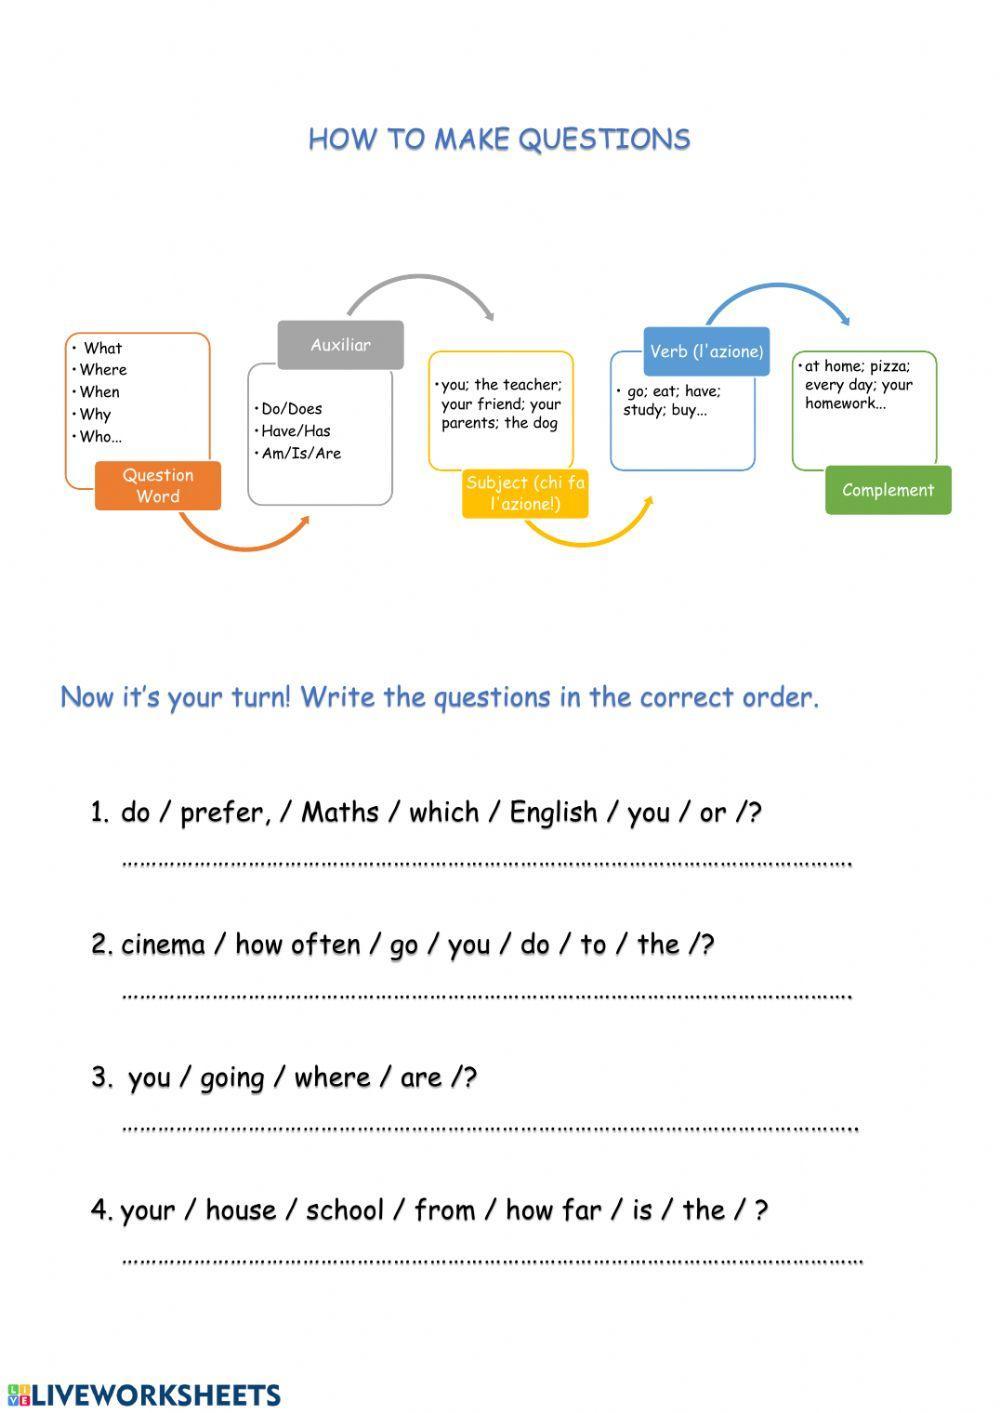 How to make questions worksheet | Live Worksheets